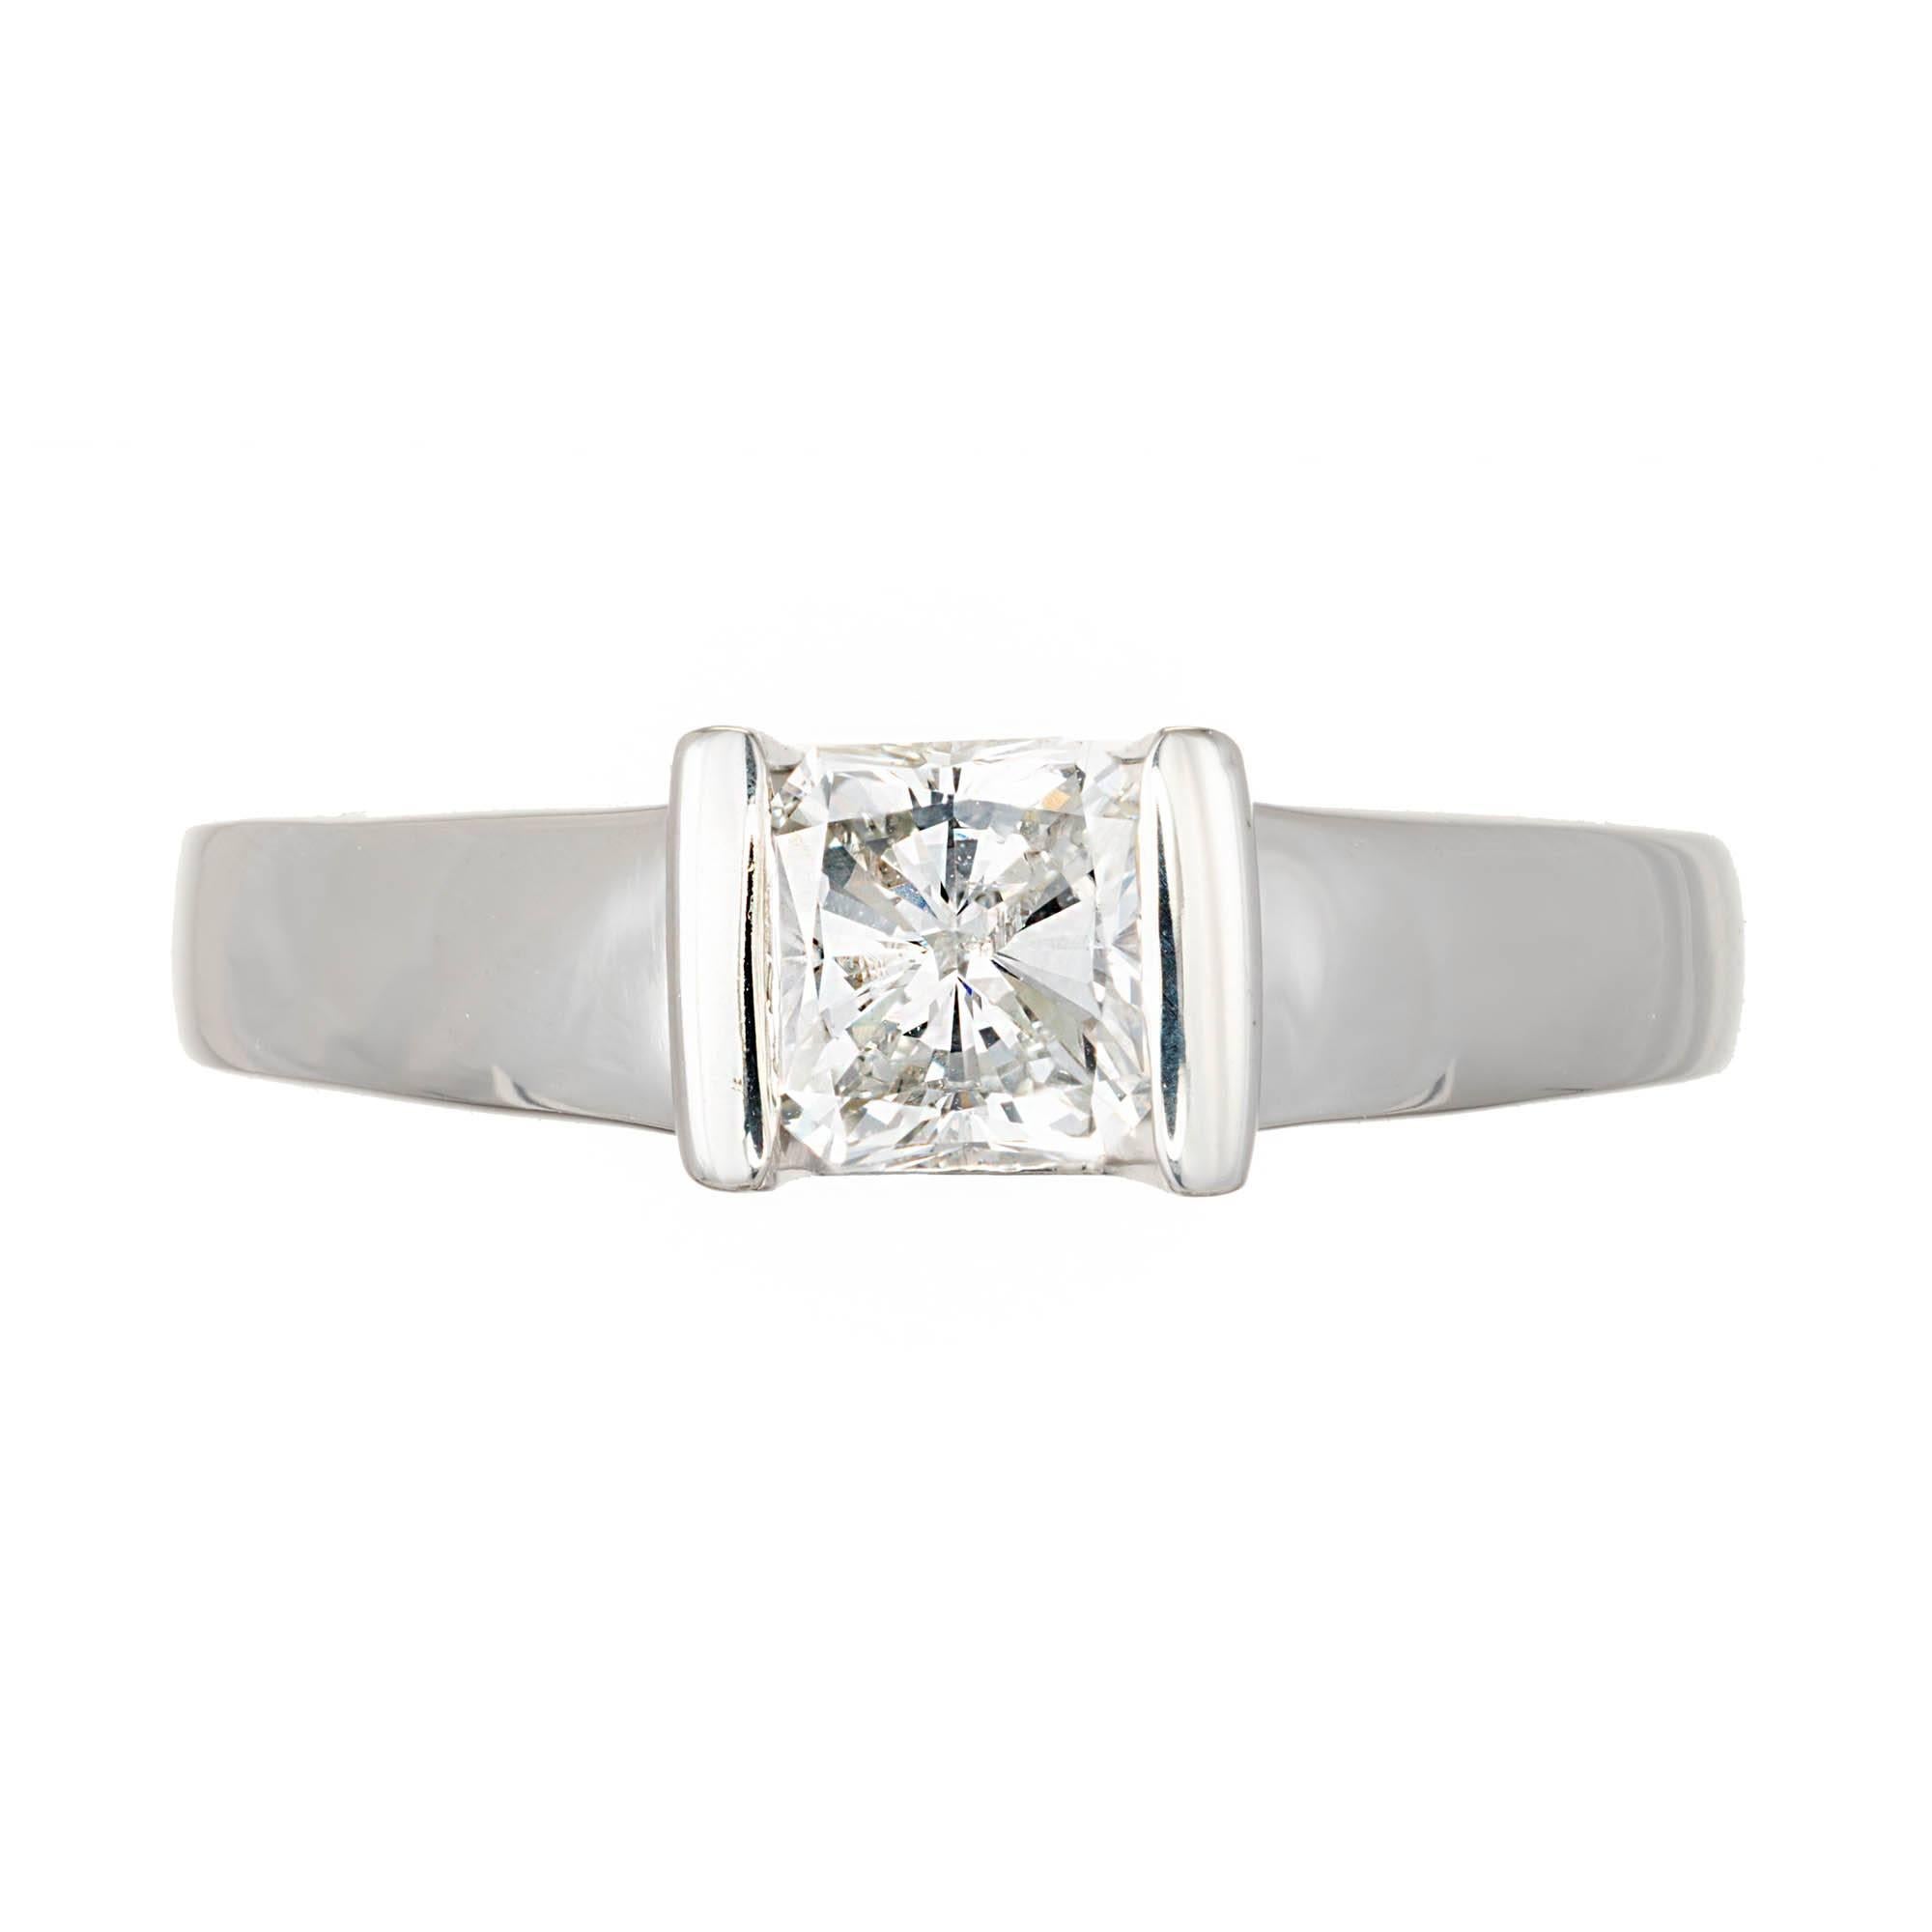 Bright beautiful sparkly and stylish white gold bar set solitaire engagement ring. EGL certified fine white F color diamond in the center.

1 radiant modified octagonal brilliant cut diamond, approx. total weight 1.00cts, F, SI3, EGL certificate